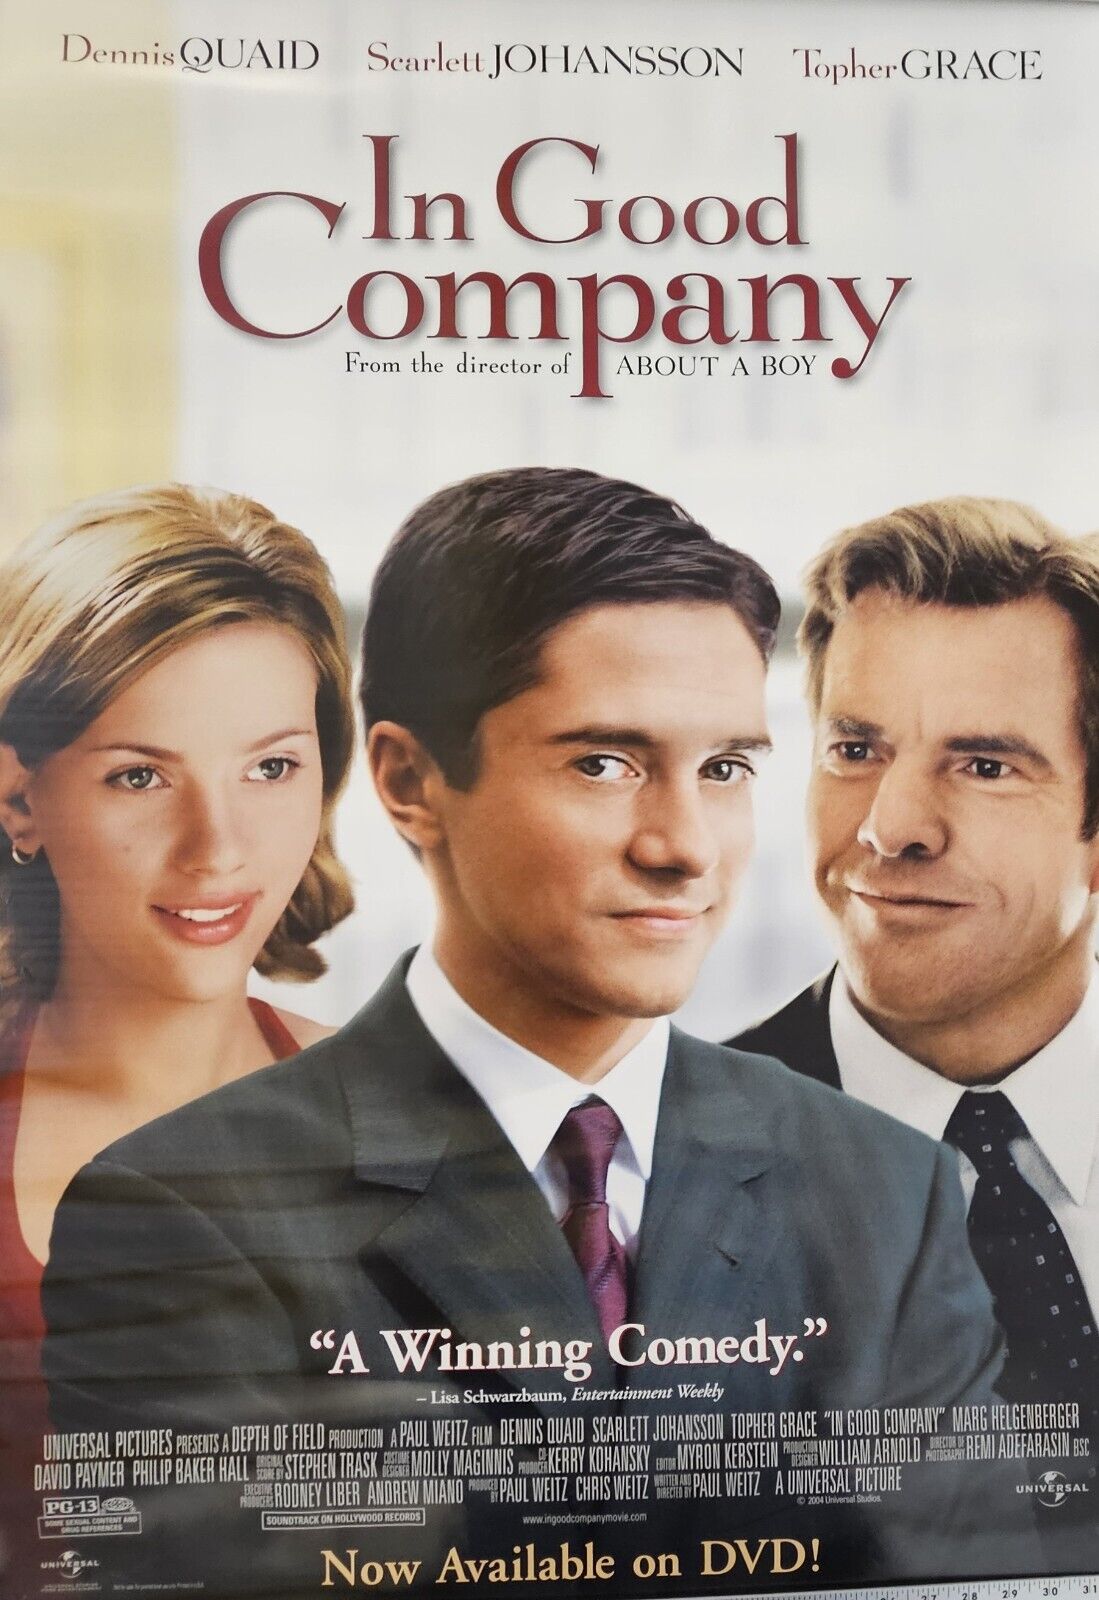 Dennis Quad and Scarlett Johansson  In In good company   27 x 40   DVD poster